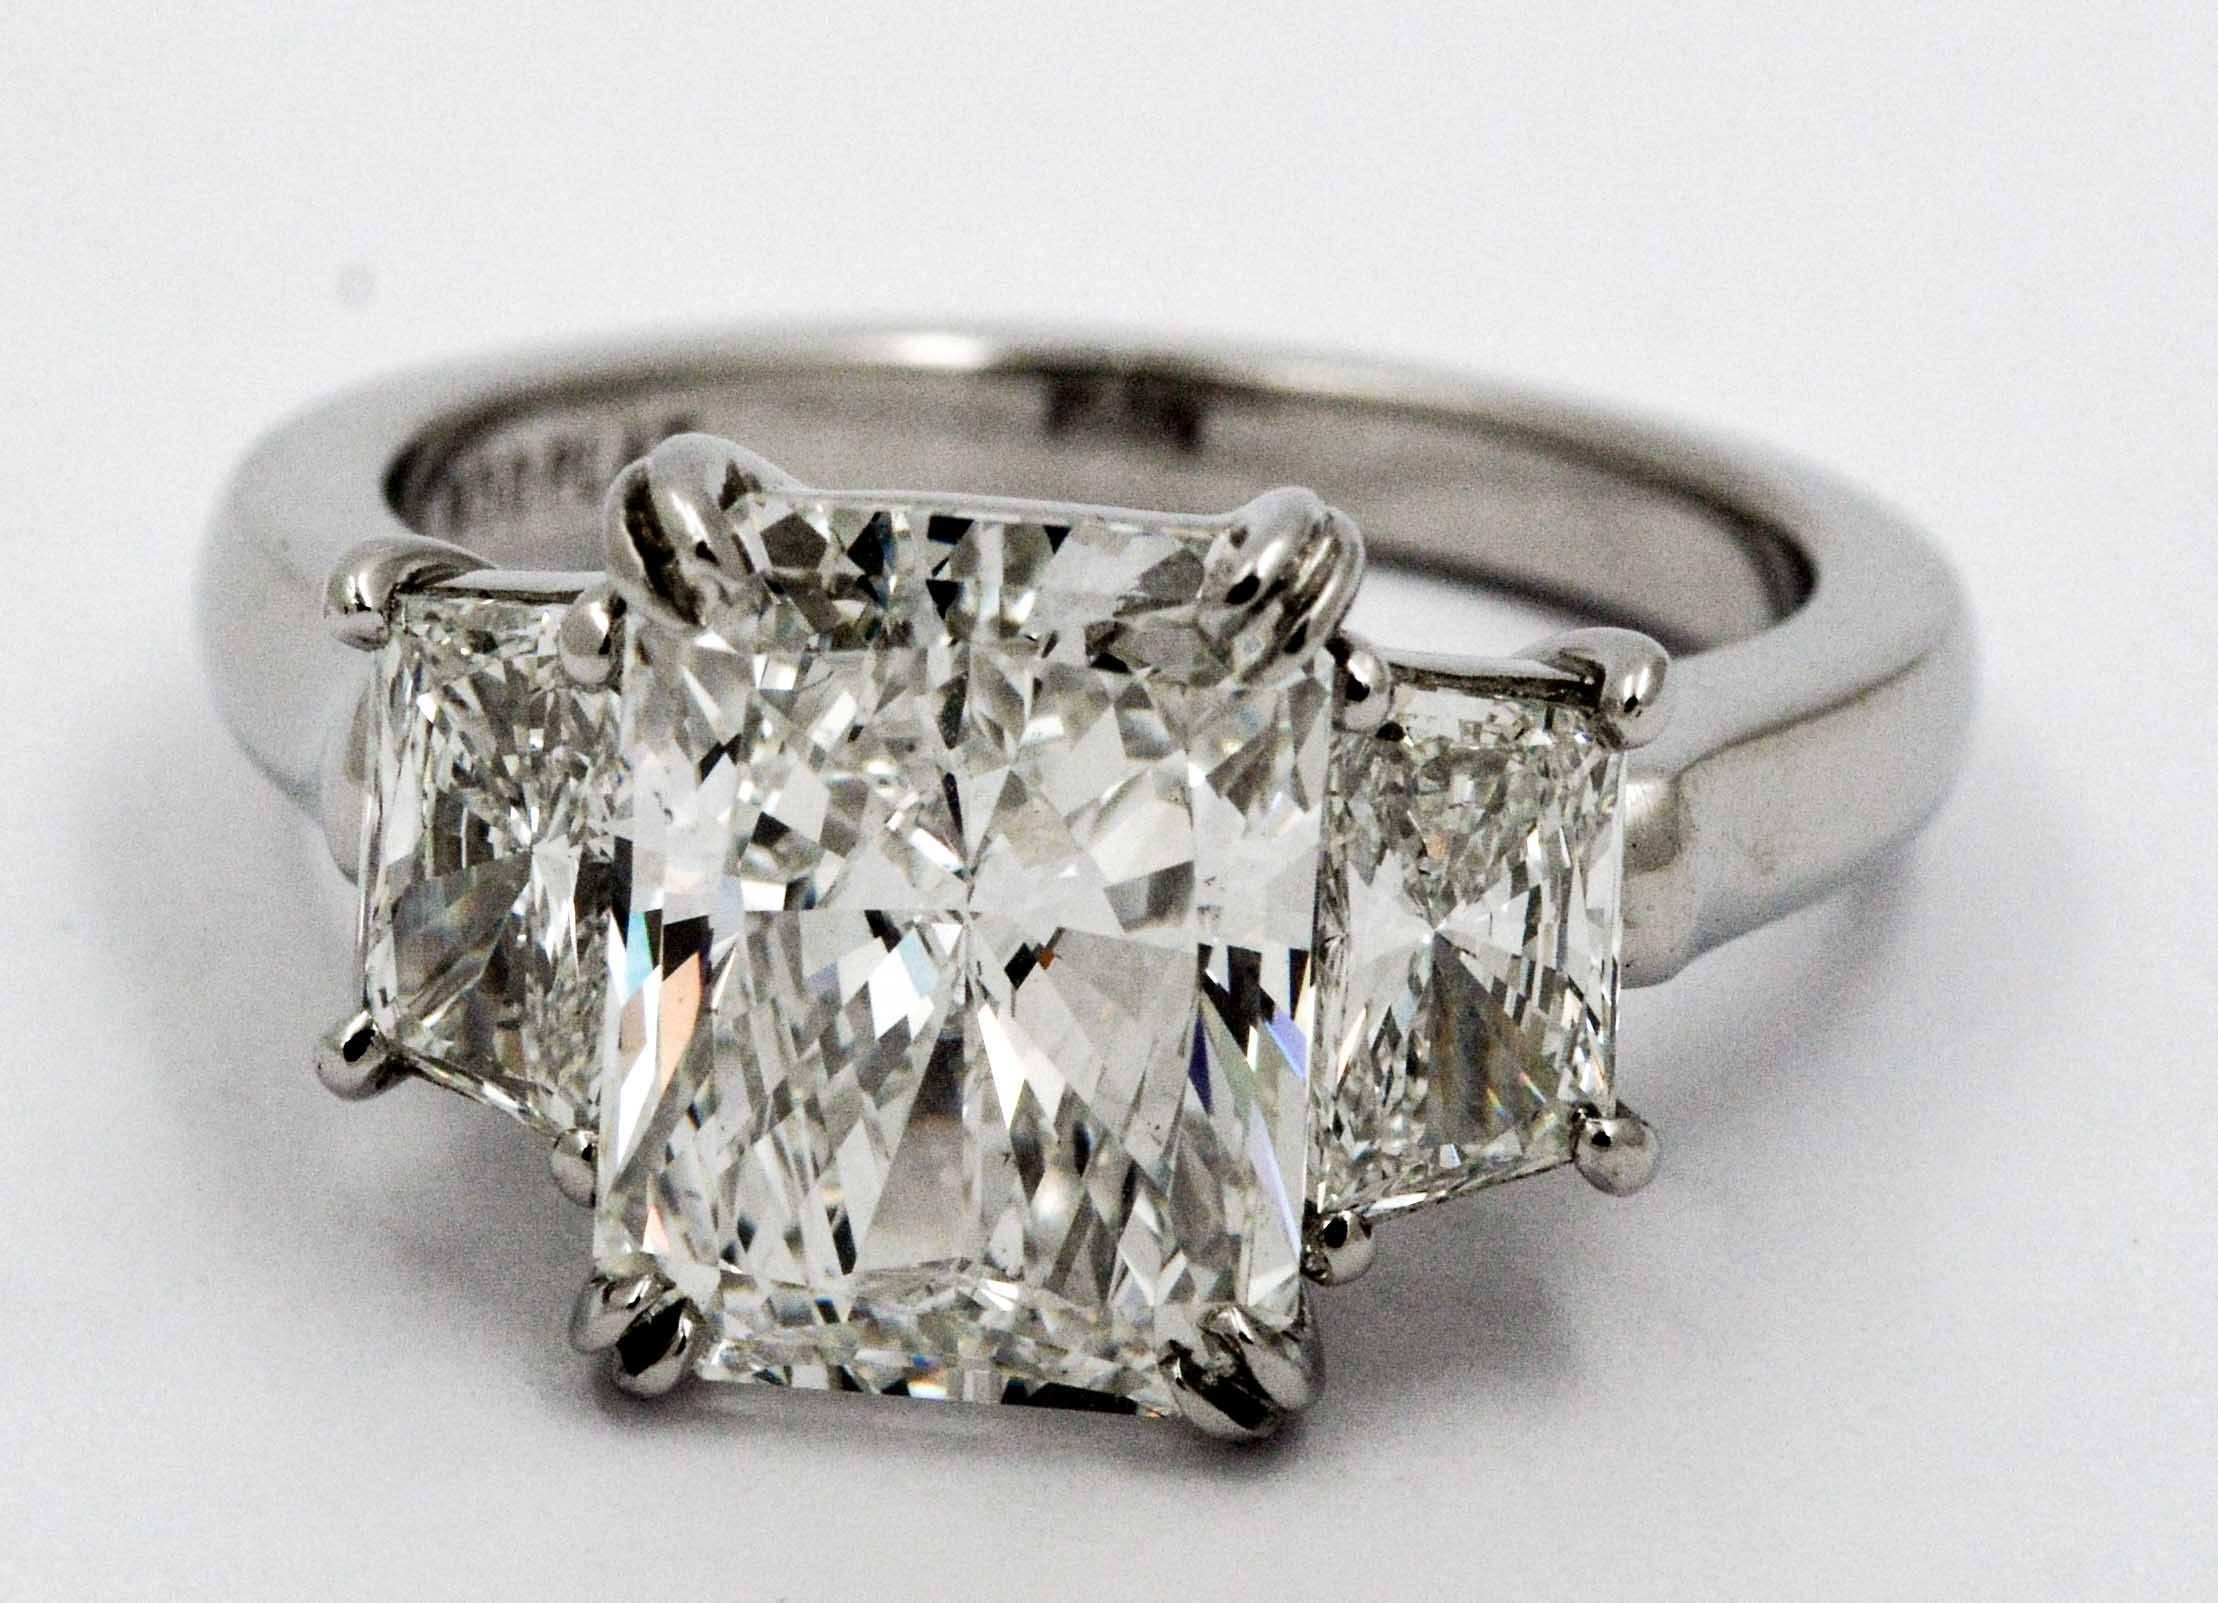 Radiating light by day or night with this glamorous engagement ring, this absolutely stunning radiant cut diamond weighs 4.05 carats with G color and VS2 clarity (ring comes with a diamond report by The Gemological Institute of America).  The